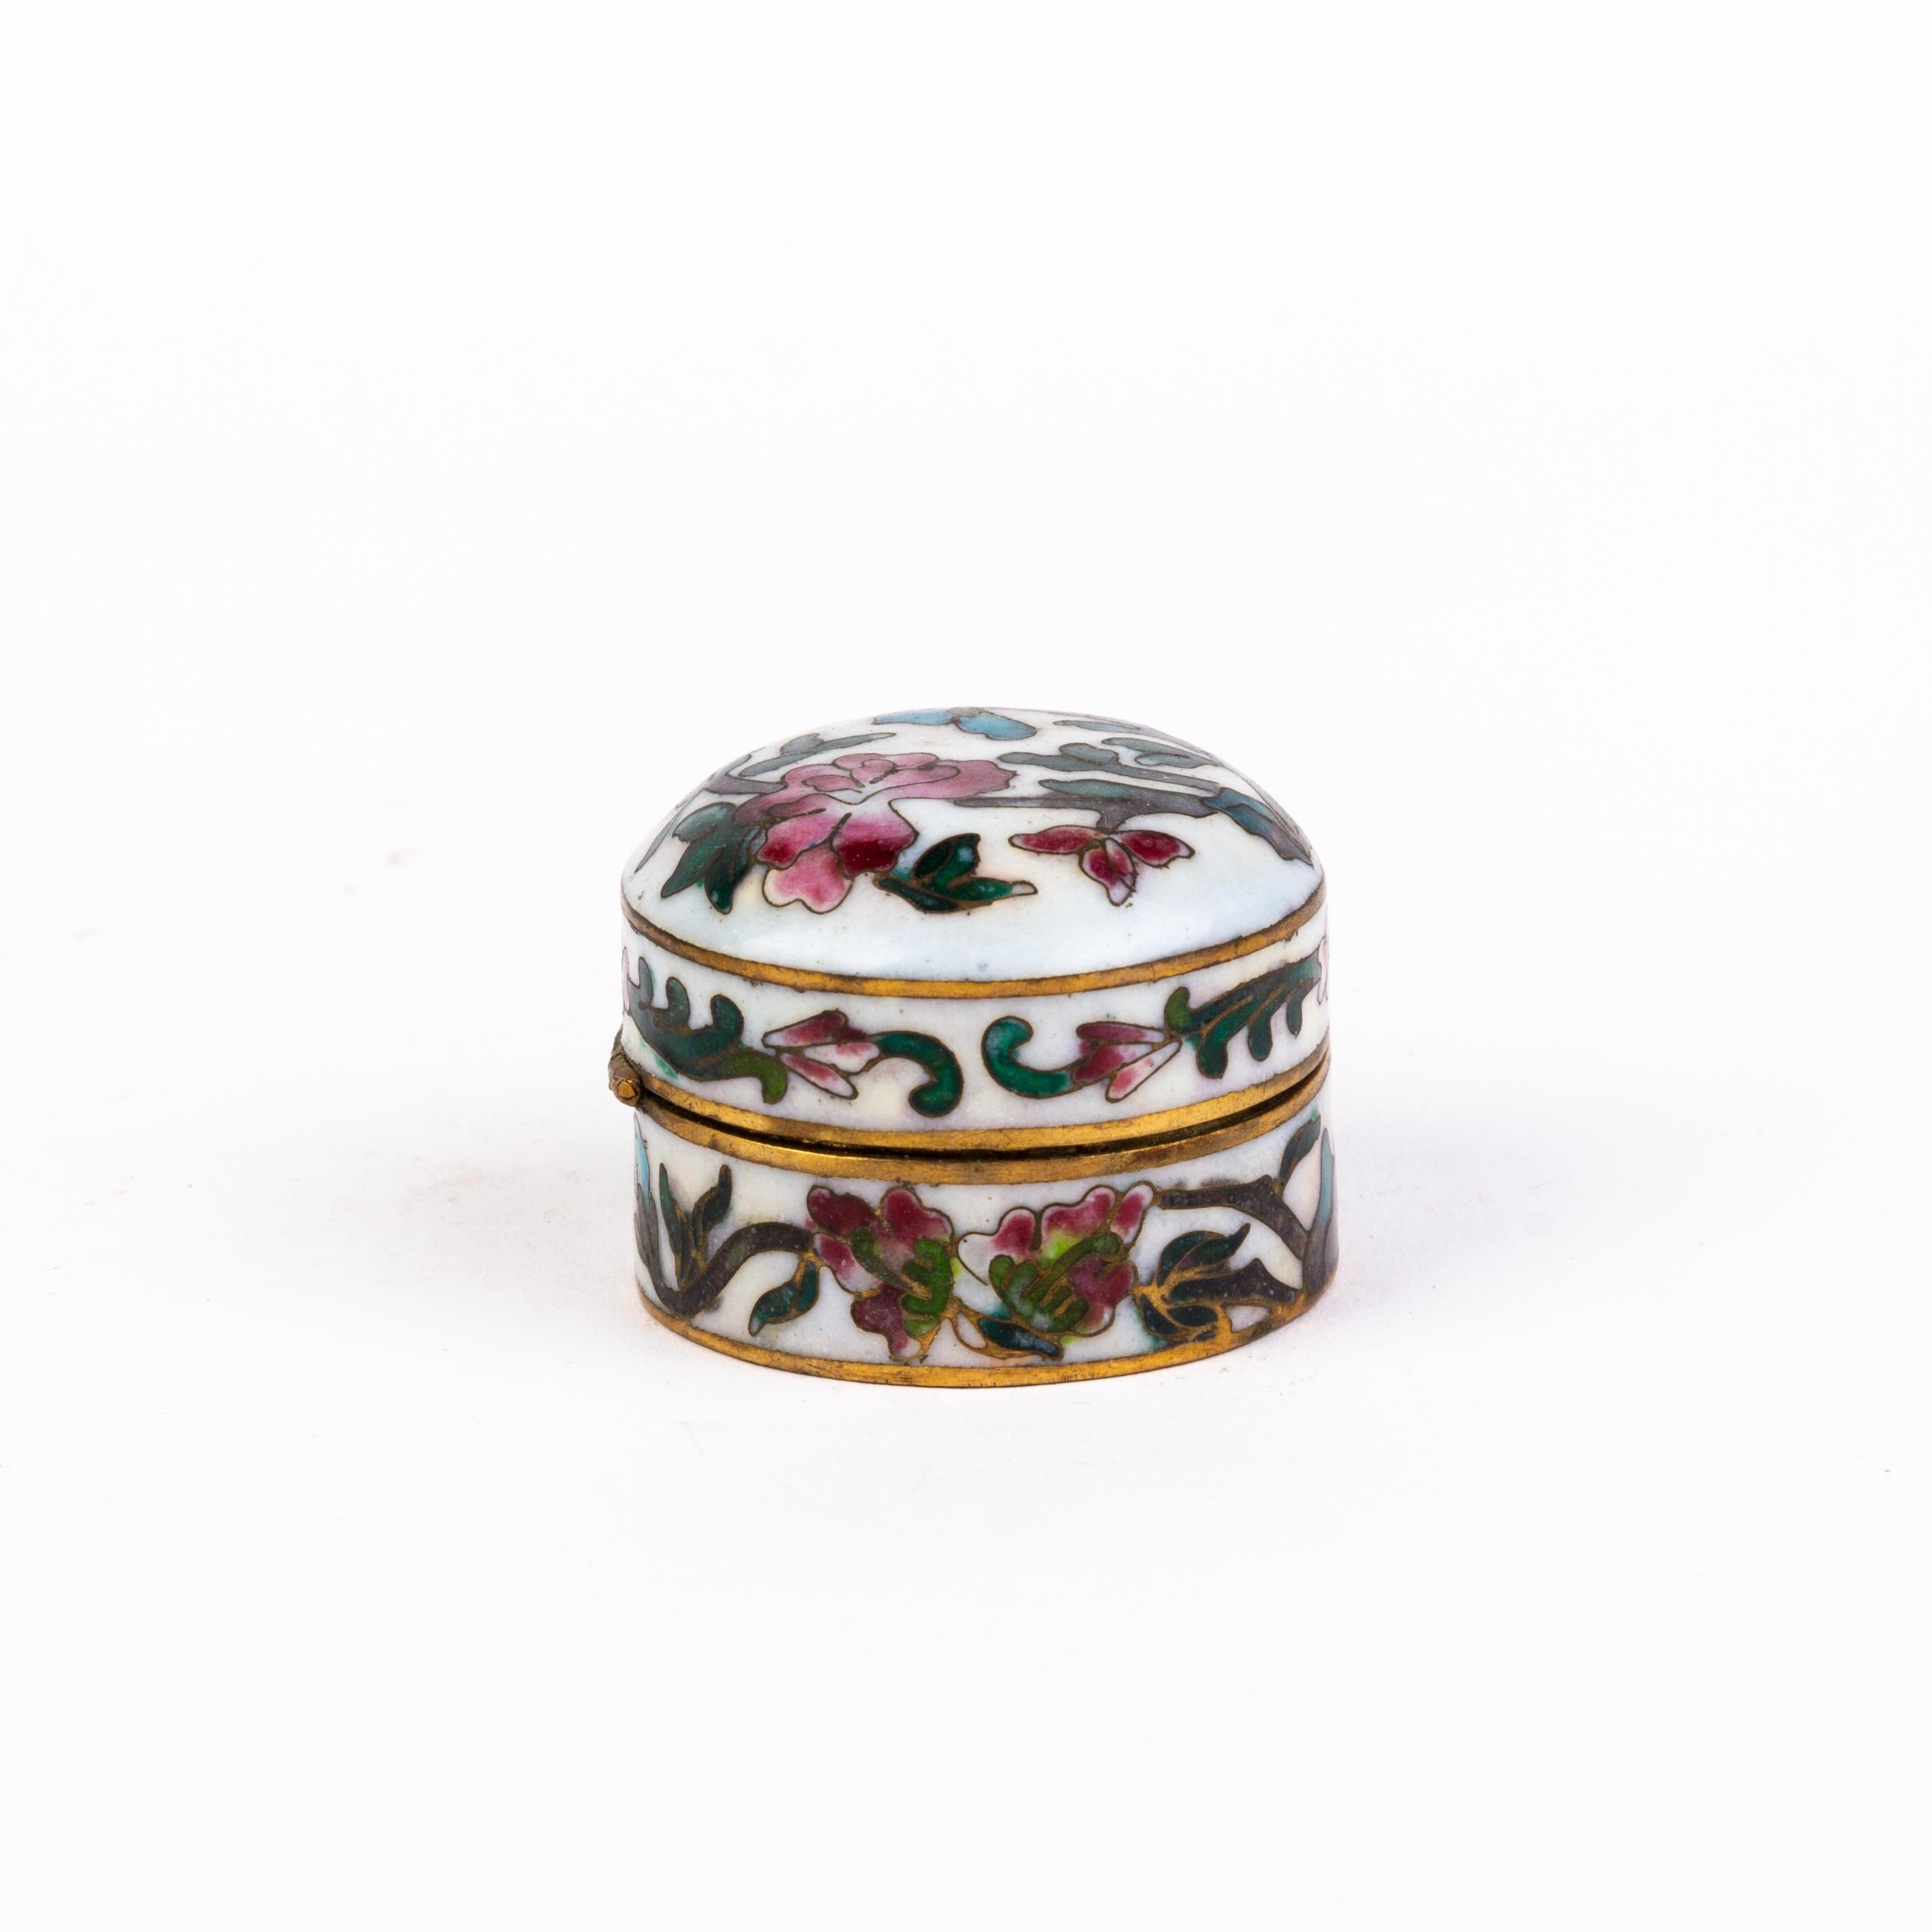 Chinese Enamel Cloisonne Snuff Box
Good condition.
From a private collection.
Free international shipping.